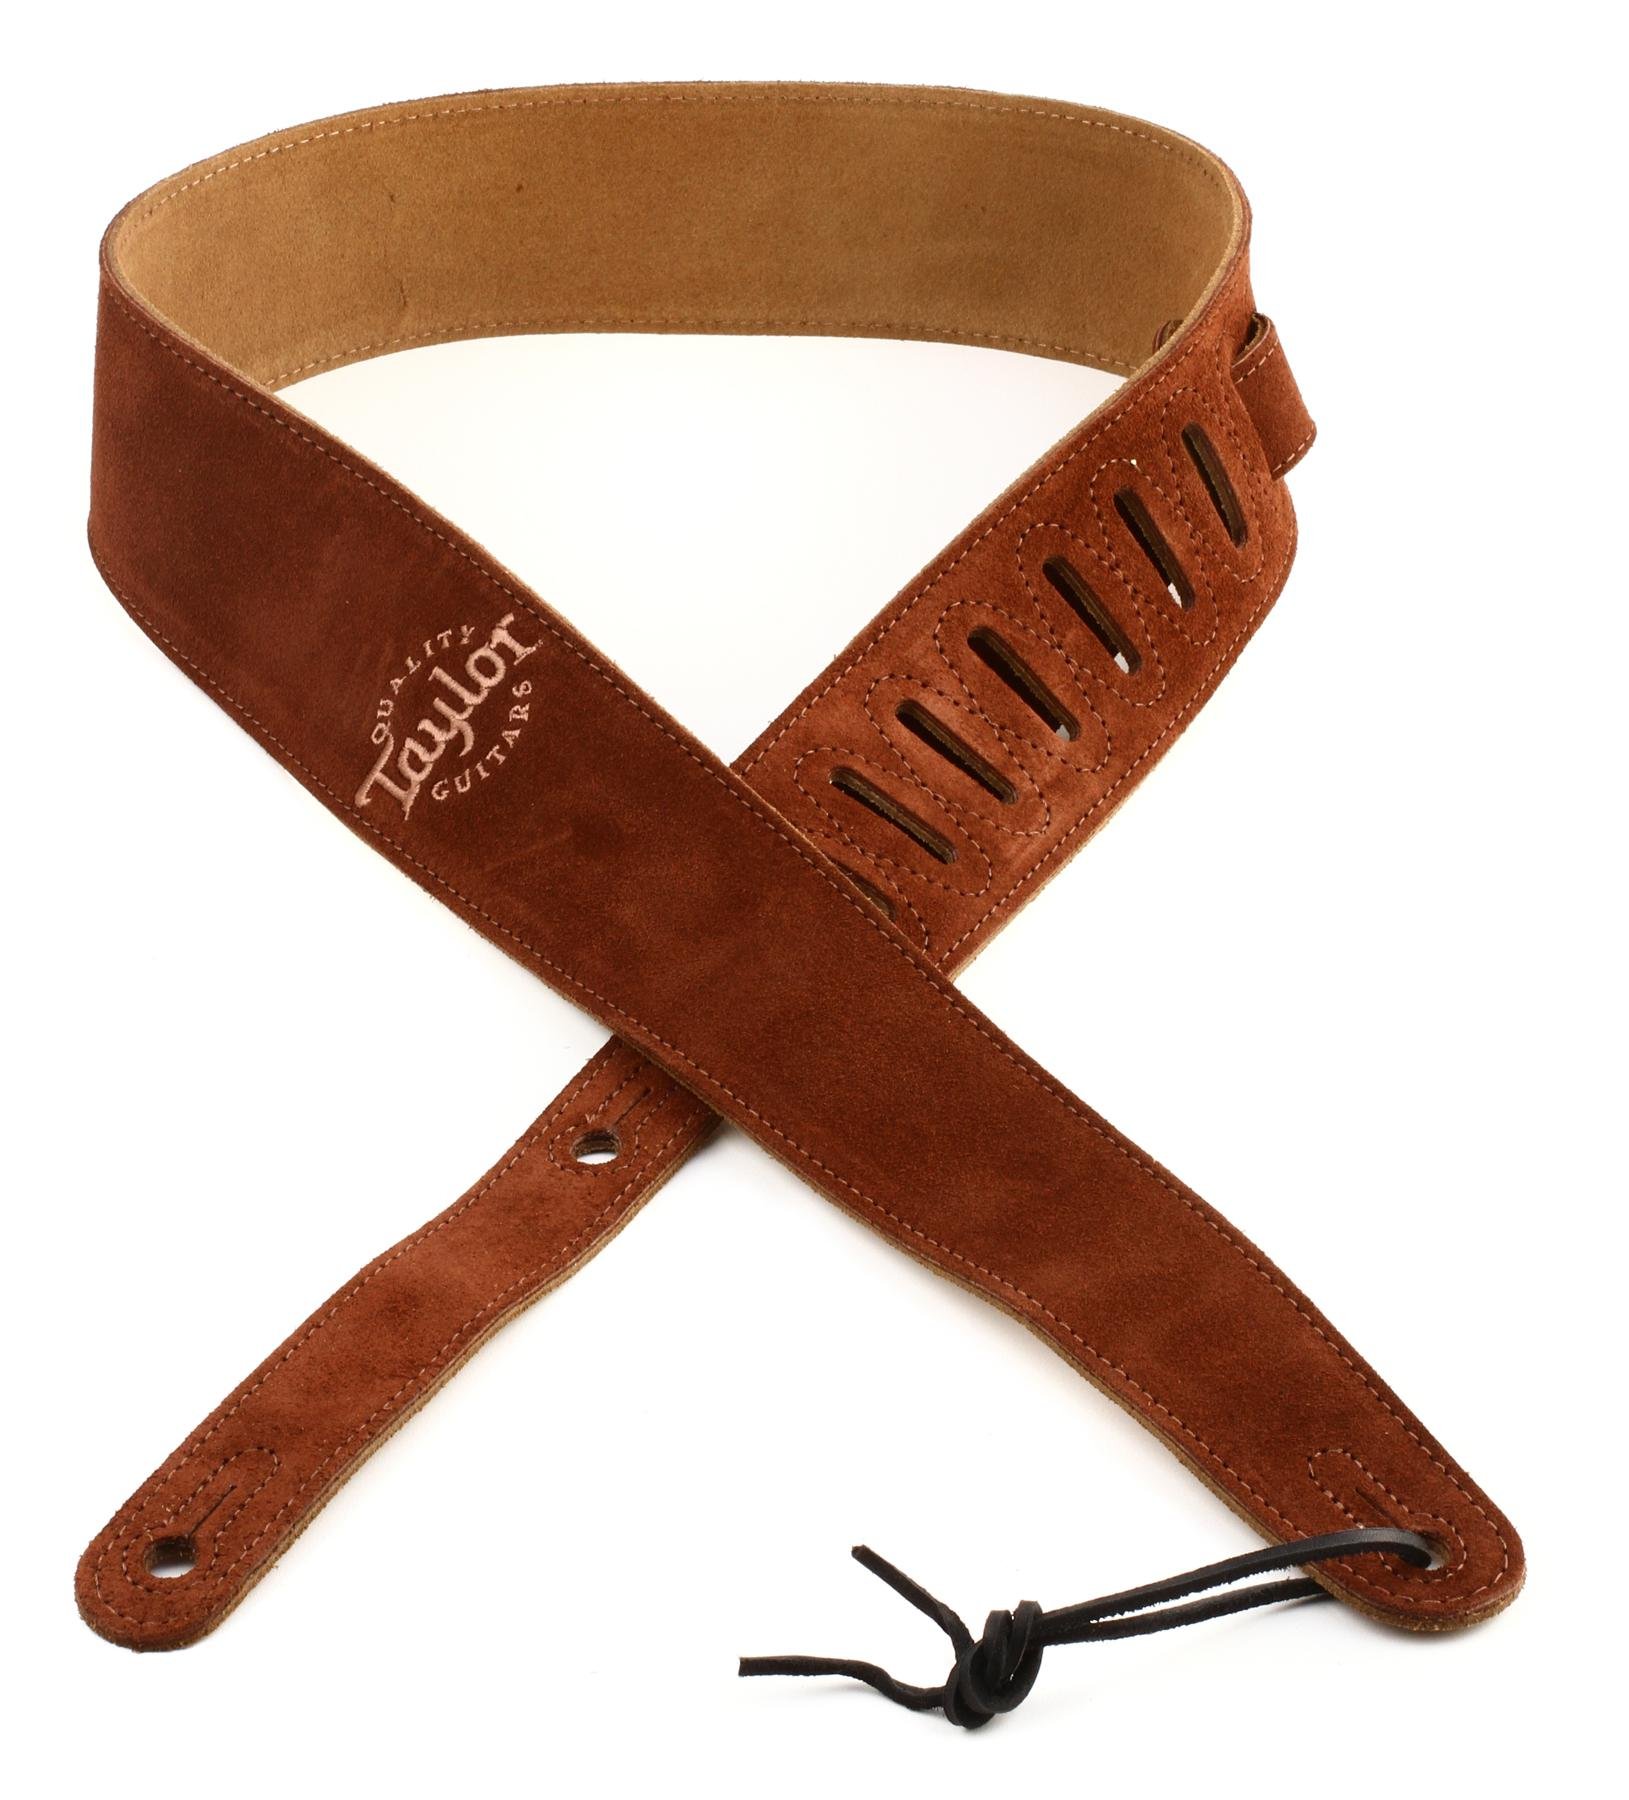 How to make the leather strap hole larger? - The Acoustic Guitar Forum